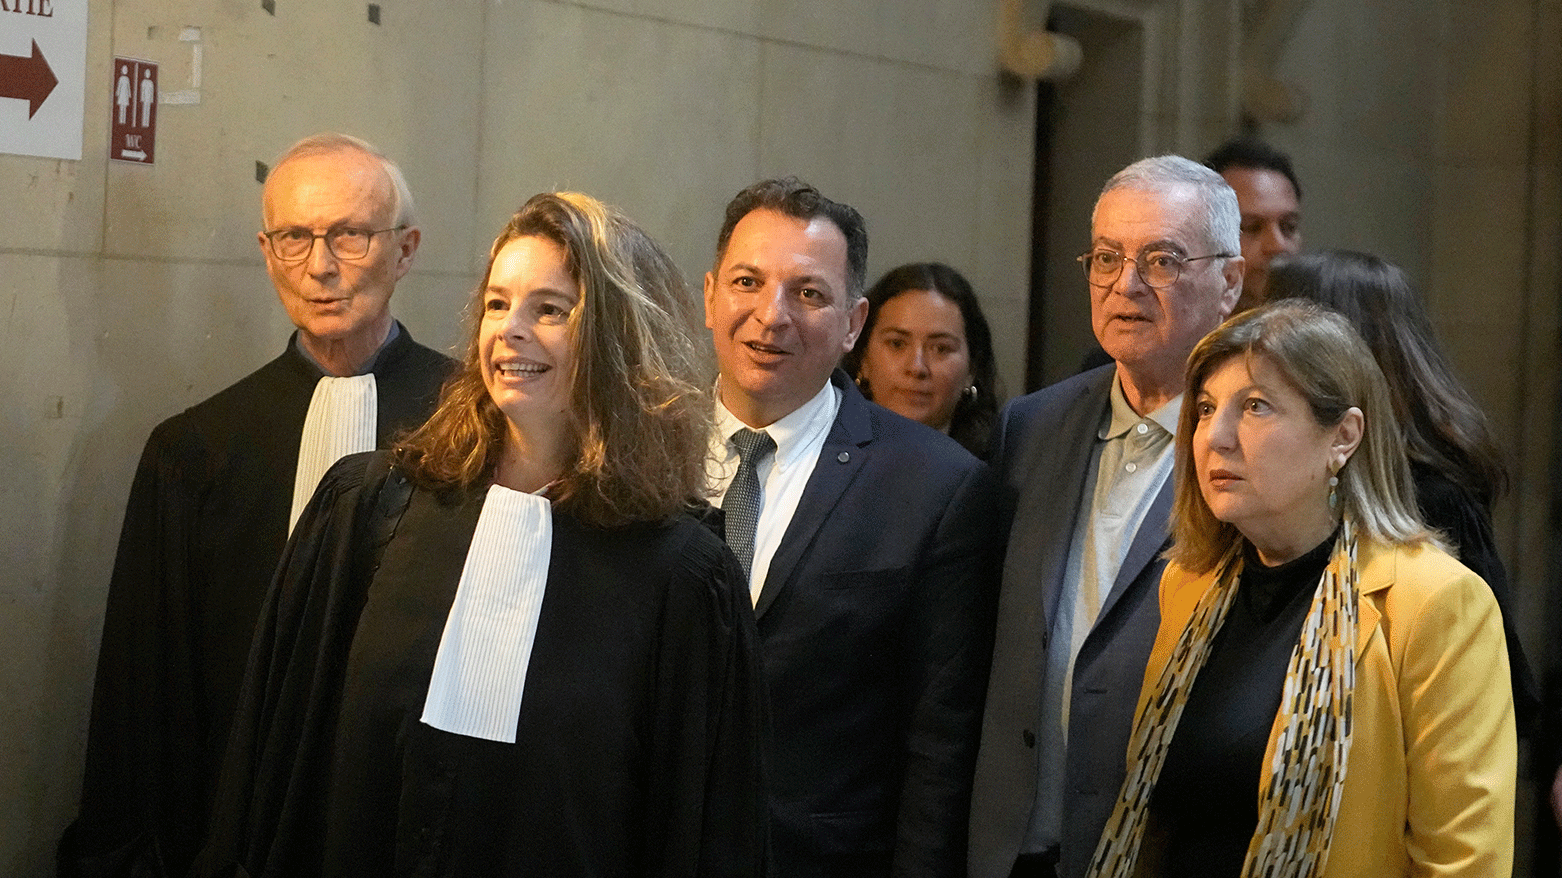 Landmark Paris trial of Syrian officials accused of torturing killing a father and his son starts